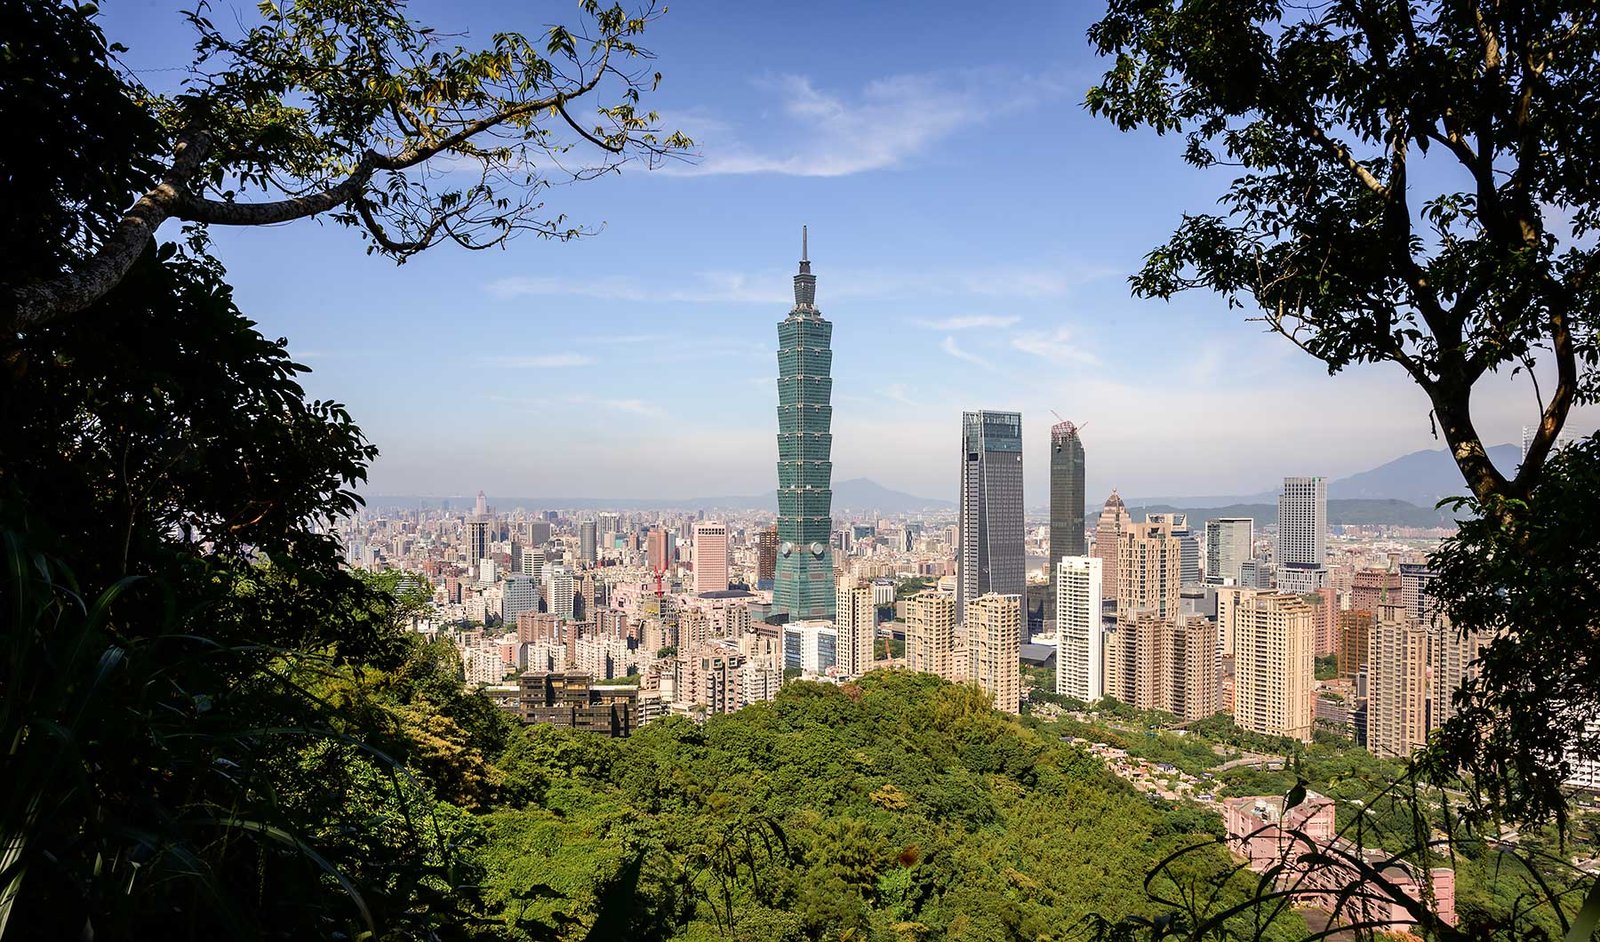 Hike the Elephant Mountain trail in Taipei. This is one of the best things to do when you visit Taipei for the first time. It also offers the best view of Taipei 101